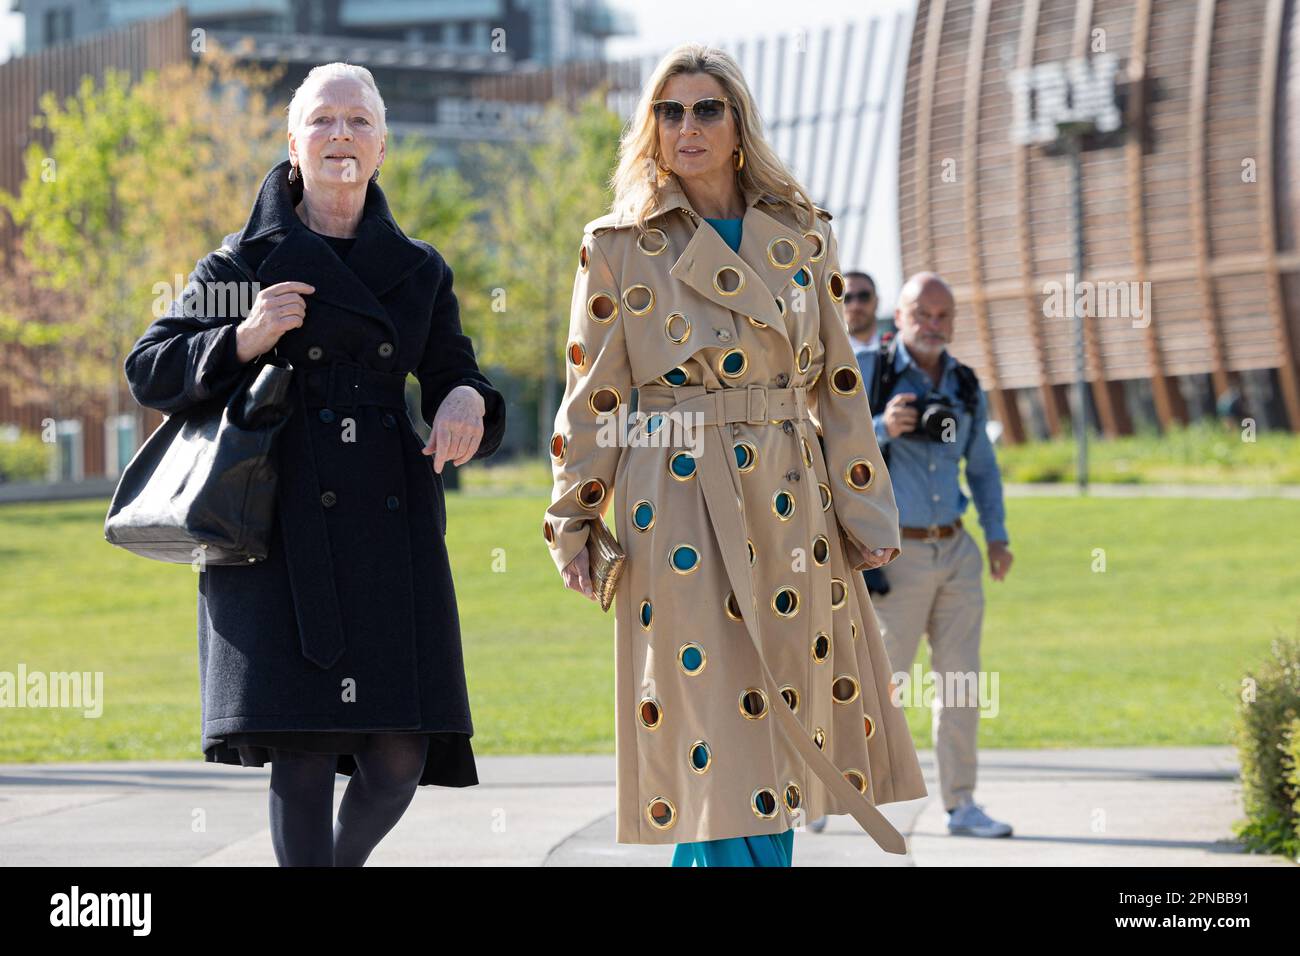 Milan, Italy. 18th Apr, 2023. HRH the Queen of Holland Máxima Zorreguieta Cerruti with Petra Blaisse (architect of Parco della Musica) take a stroll at Parco della Musica during Milan furniture exhibition, Milan, April 18th, 2023. Photo by Marco Piovanotto/Abacapress.com Credit: Abaca Press/Alamy Live News Stock Photo